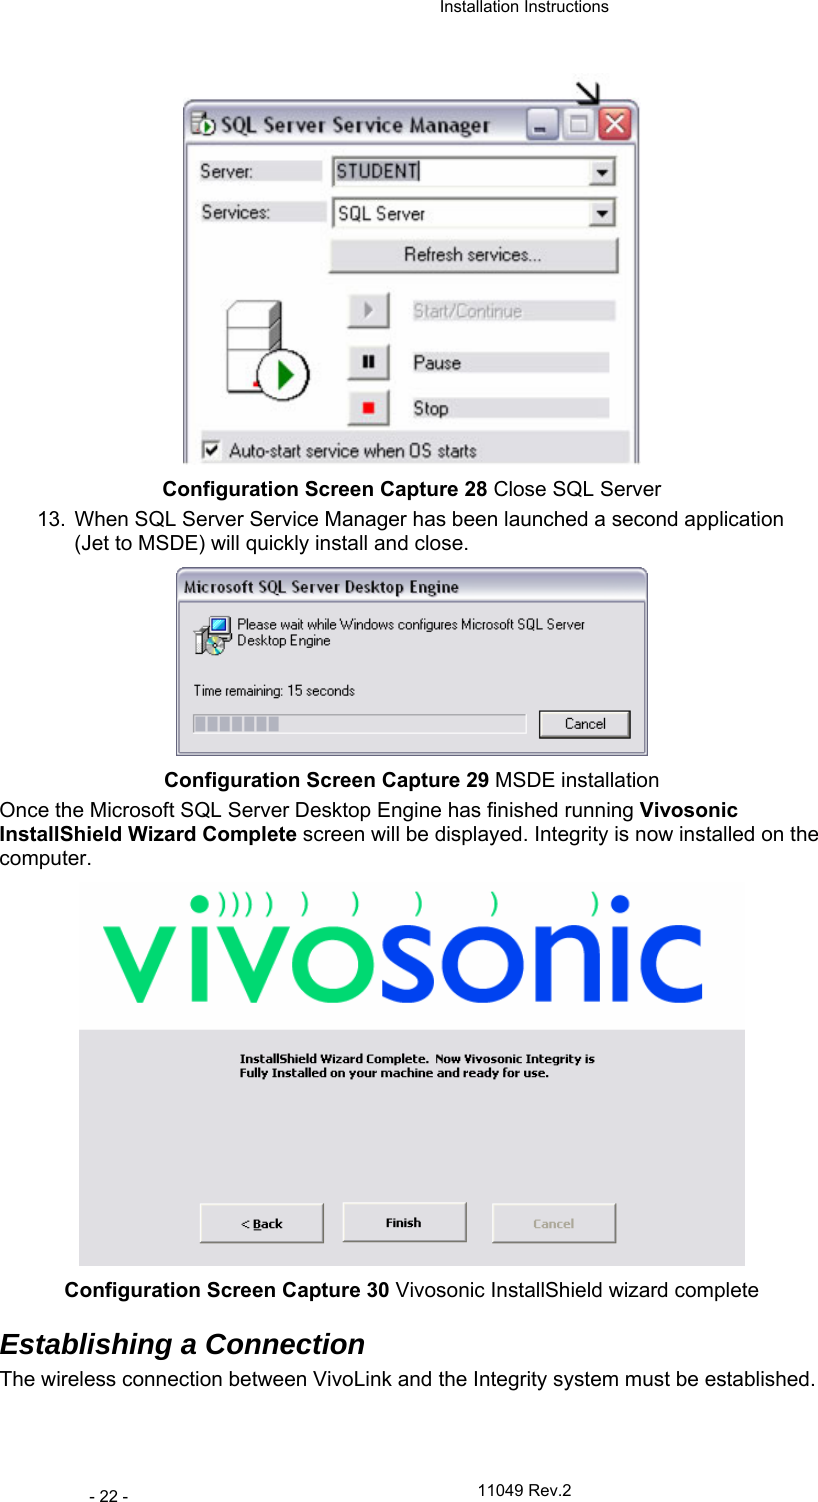  Installation Instructions   11049 Rev.2 - 22 -  Configuration Screen Capture 28 Close SQL Server 13.  When SQL Server Service Manager has been launched a second application (Jet to MSDE) will quickly install and close.   Configuration Screen Capture 29 MSDE installation Once the Microsoft SQL Server Desktop Engine has finished running Vivosonic InstallShield Wizard Complete screen will be displayed. Integrity is now installed on the computer.  Configuration Screen Capture 30 Vivosonic InstallShield wizard complete Establishing a Connection  The wireless connection between VivoLink and the Integrity system must be established.  